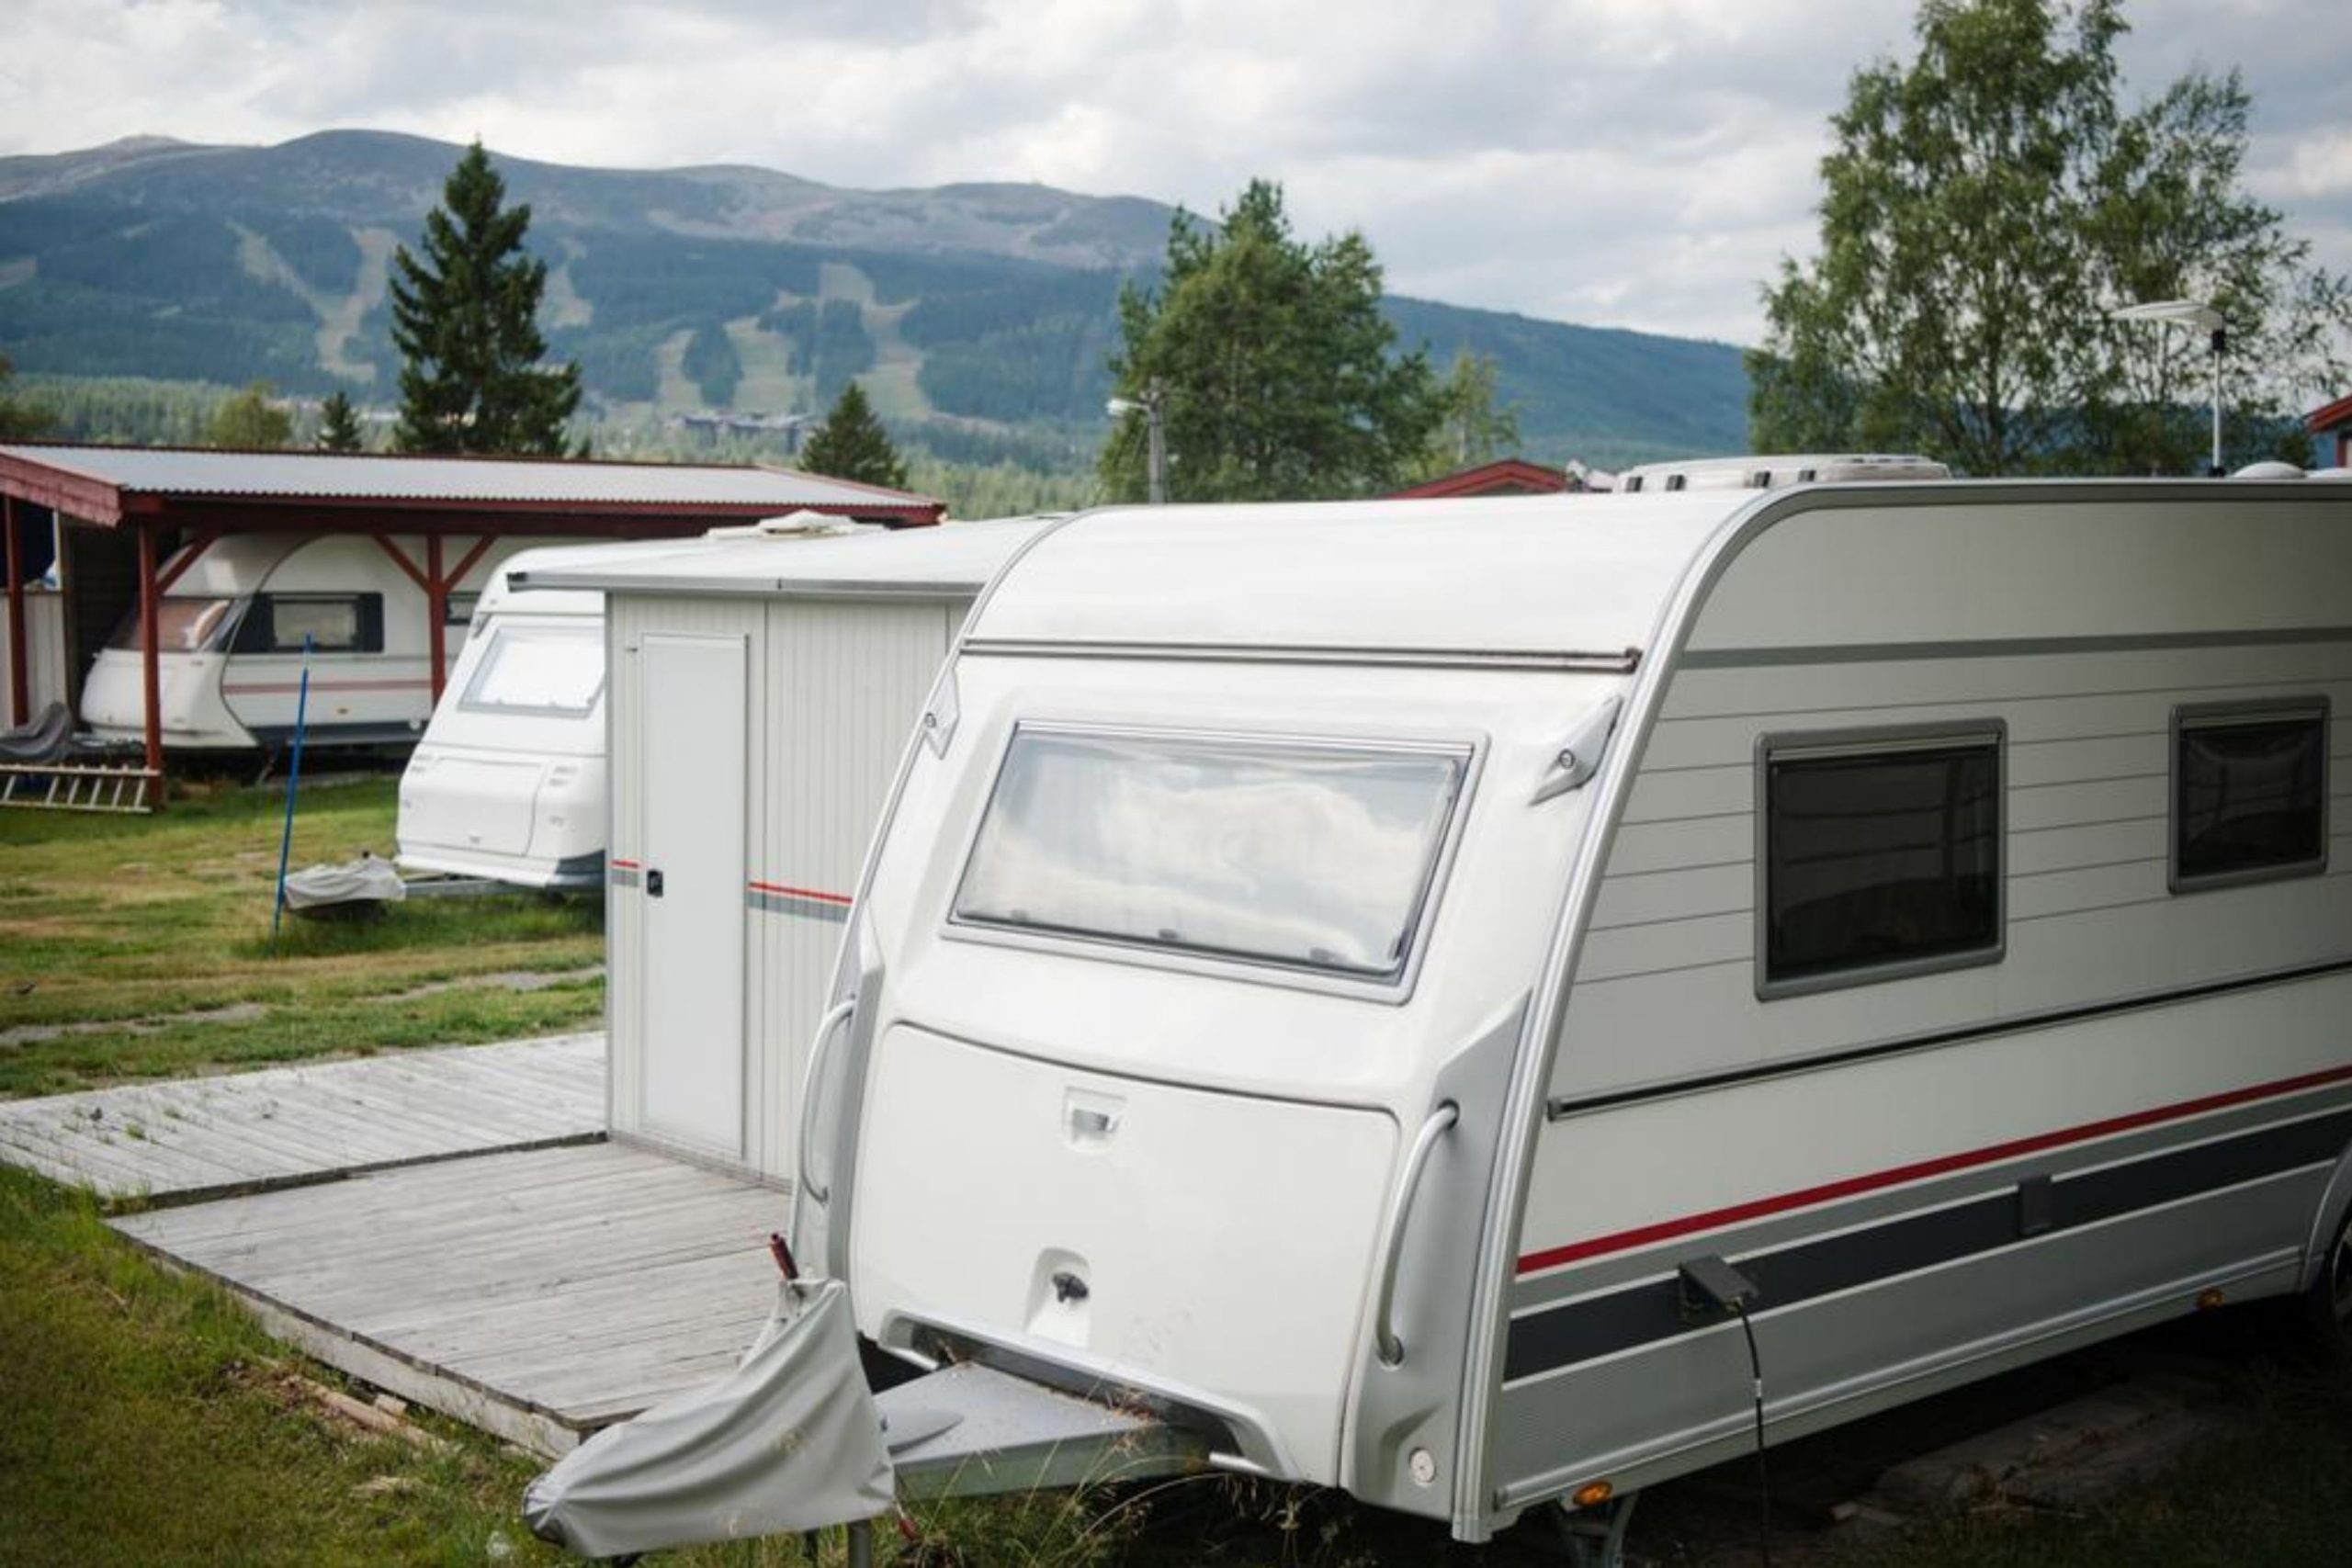 How to Reseal a Travel Trailer Roof